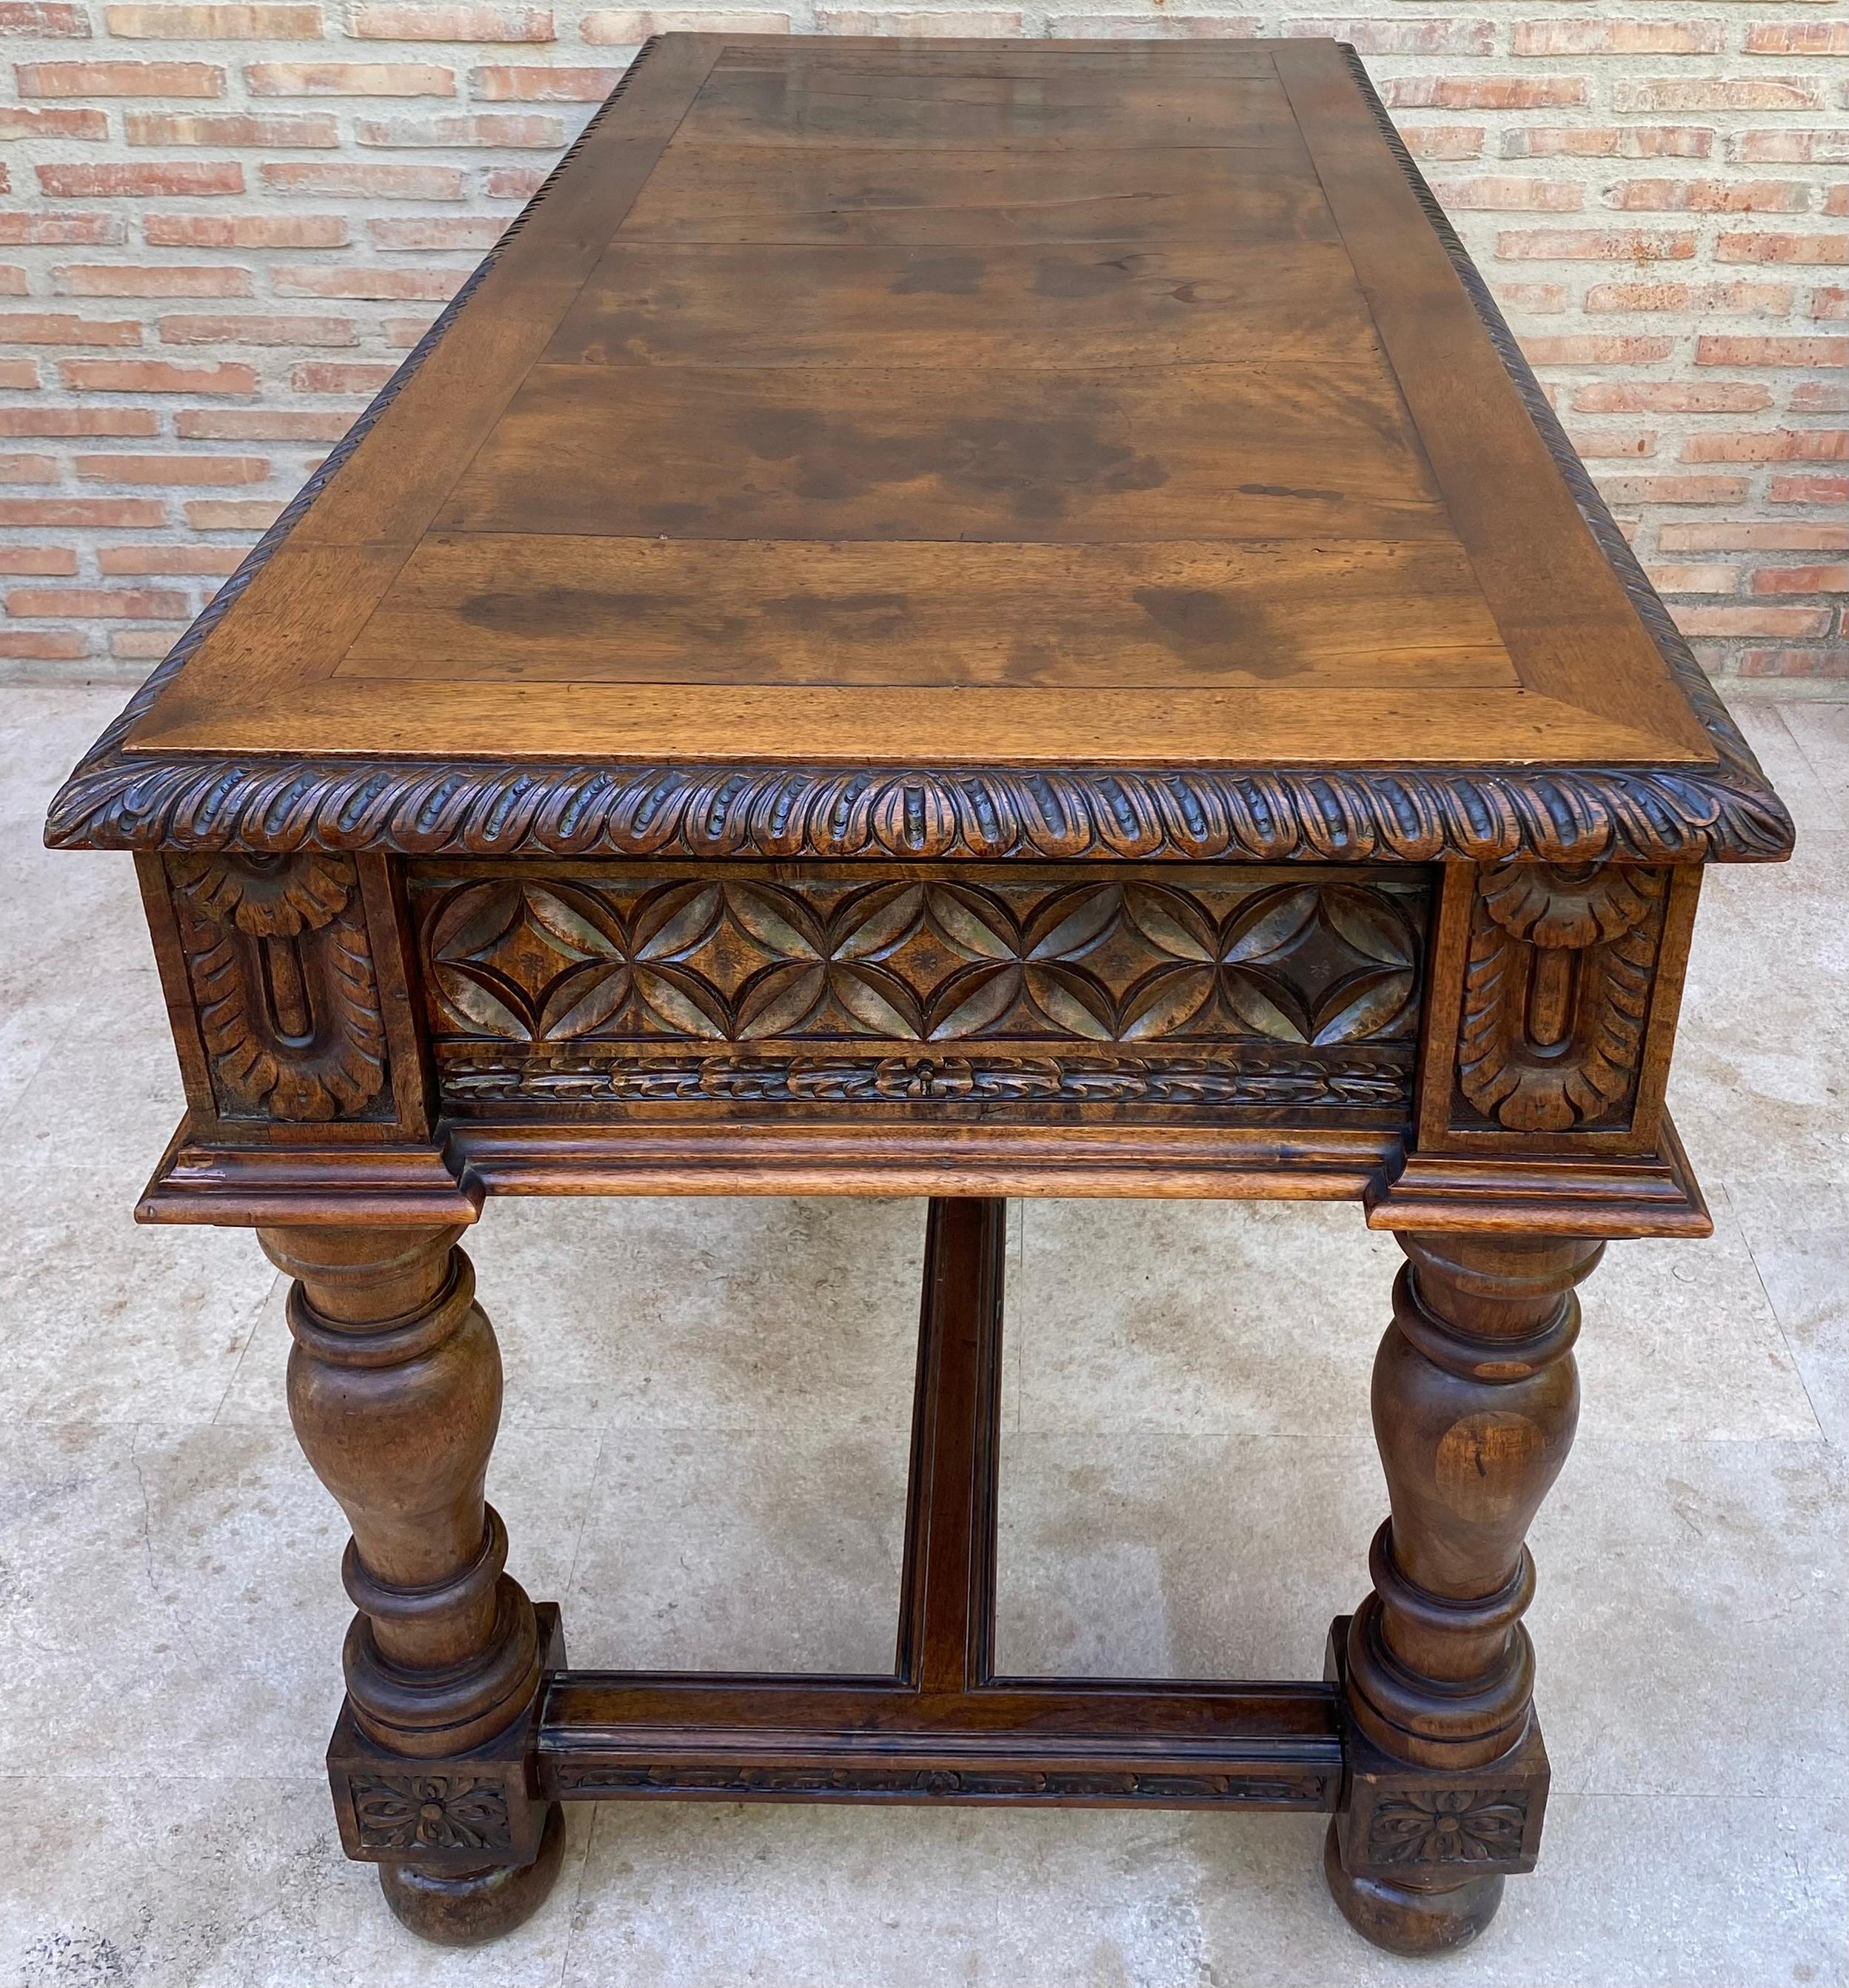 19th Century Spanish Walnut Desk with Two Drawers & Strong Legs, 1890s For Sale 9